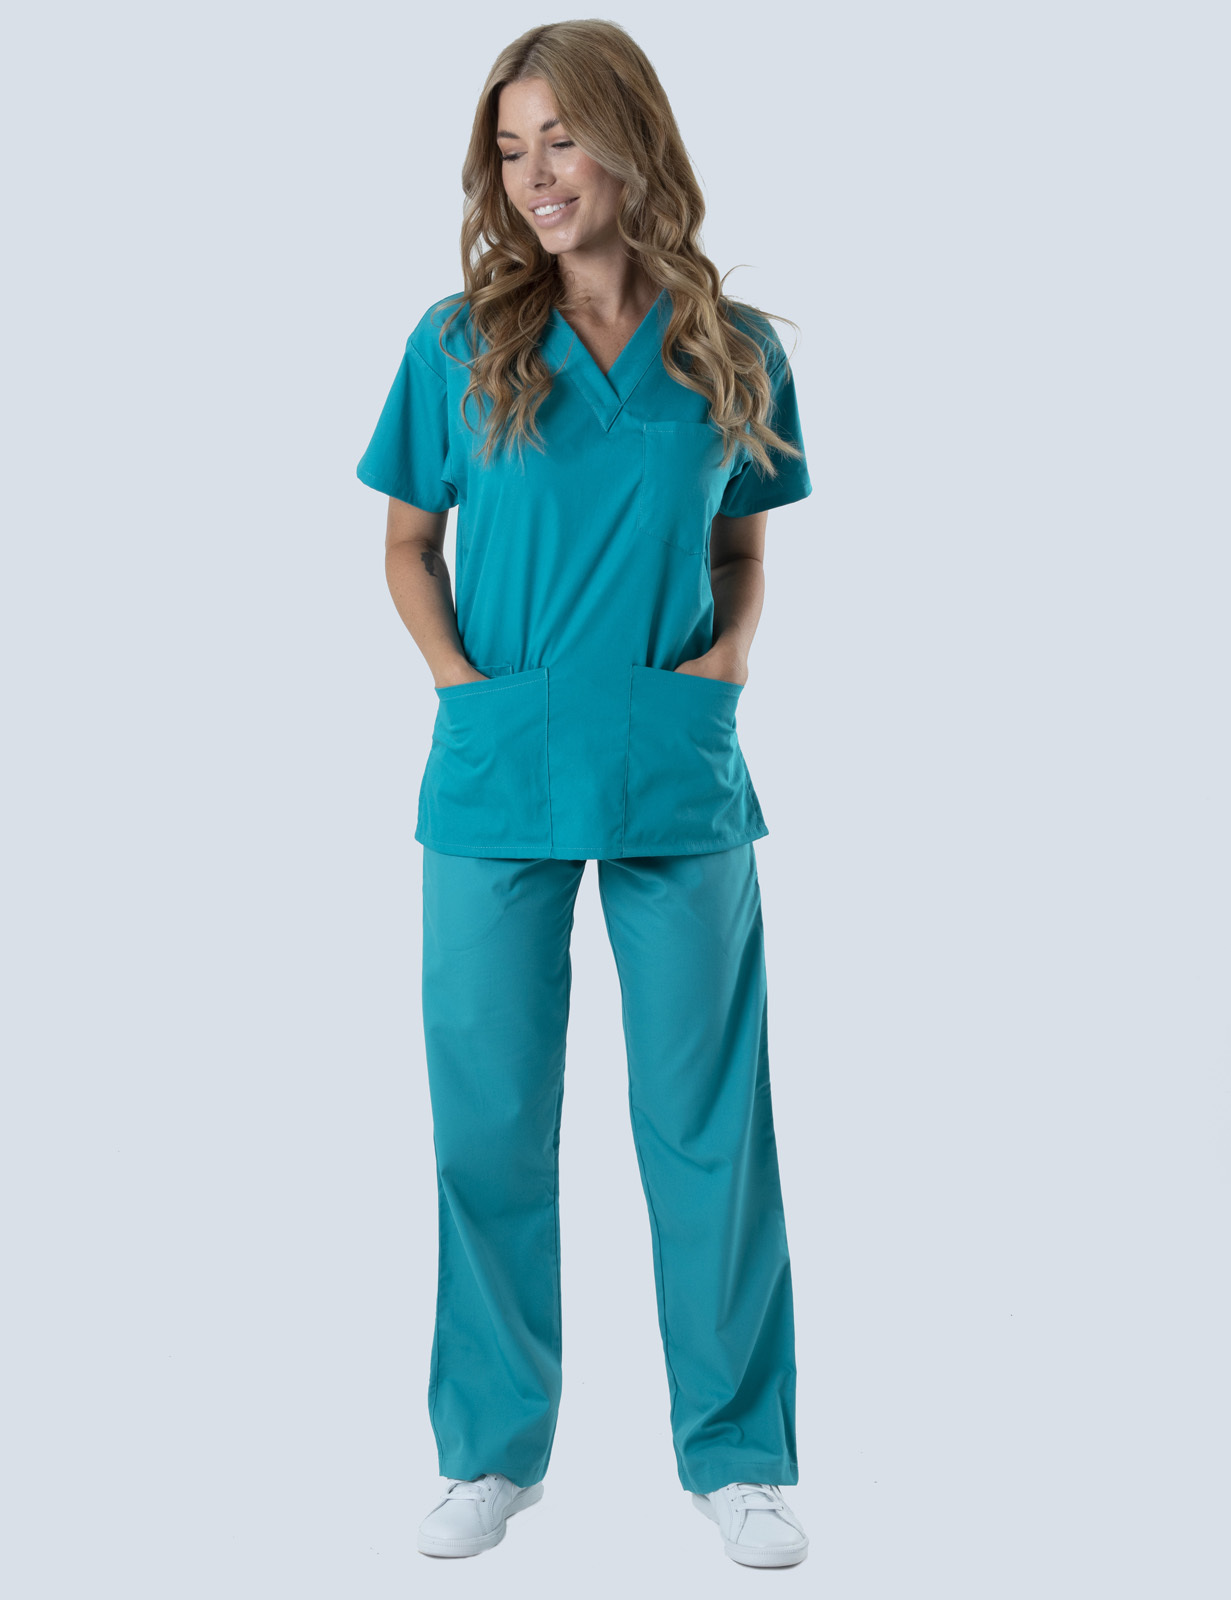 SCPU Hospital AIN (4 Pocket Scrub Top and Cargo Pants in Teal incl Logos)